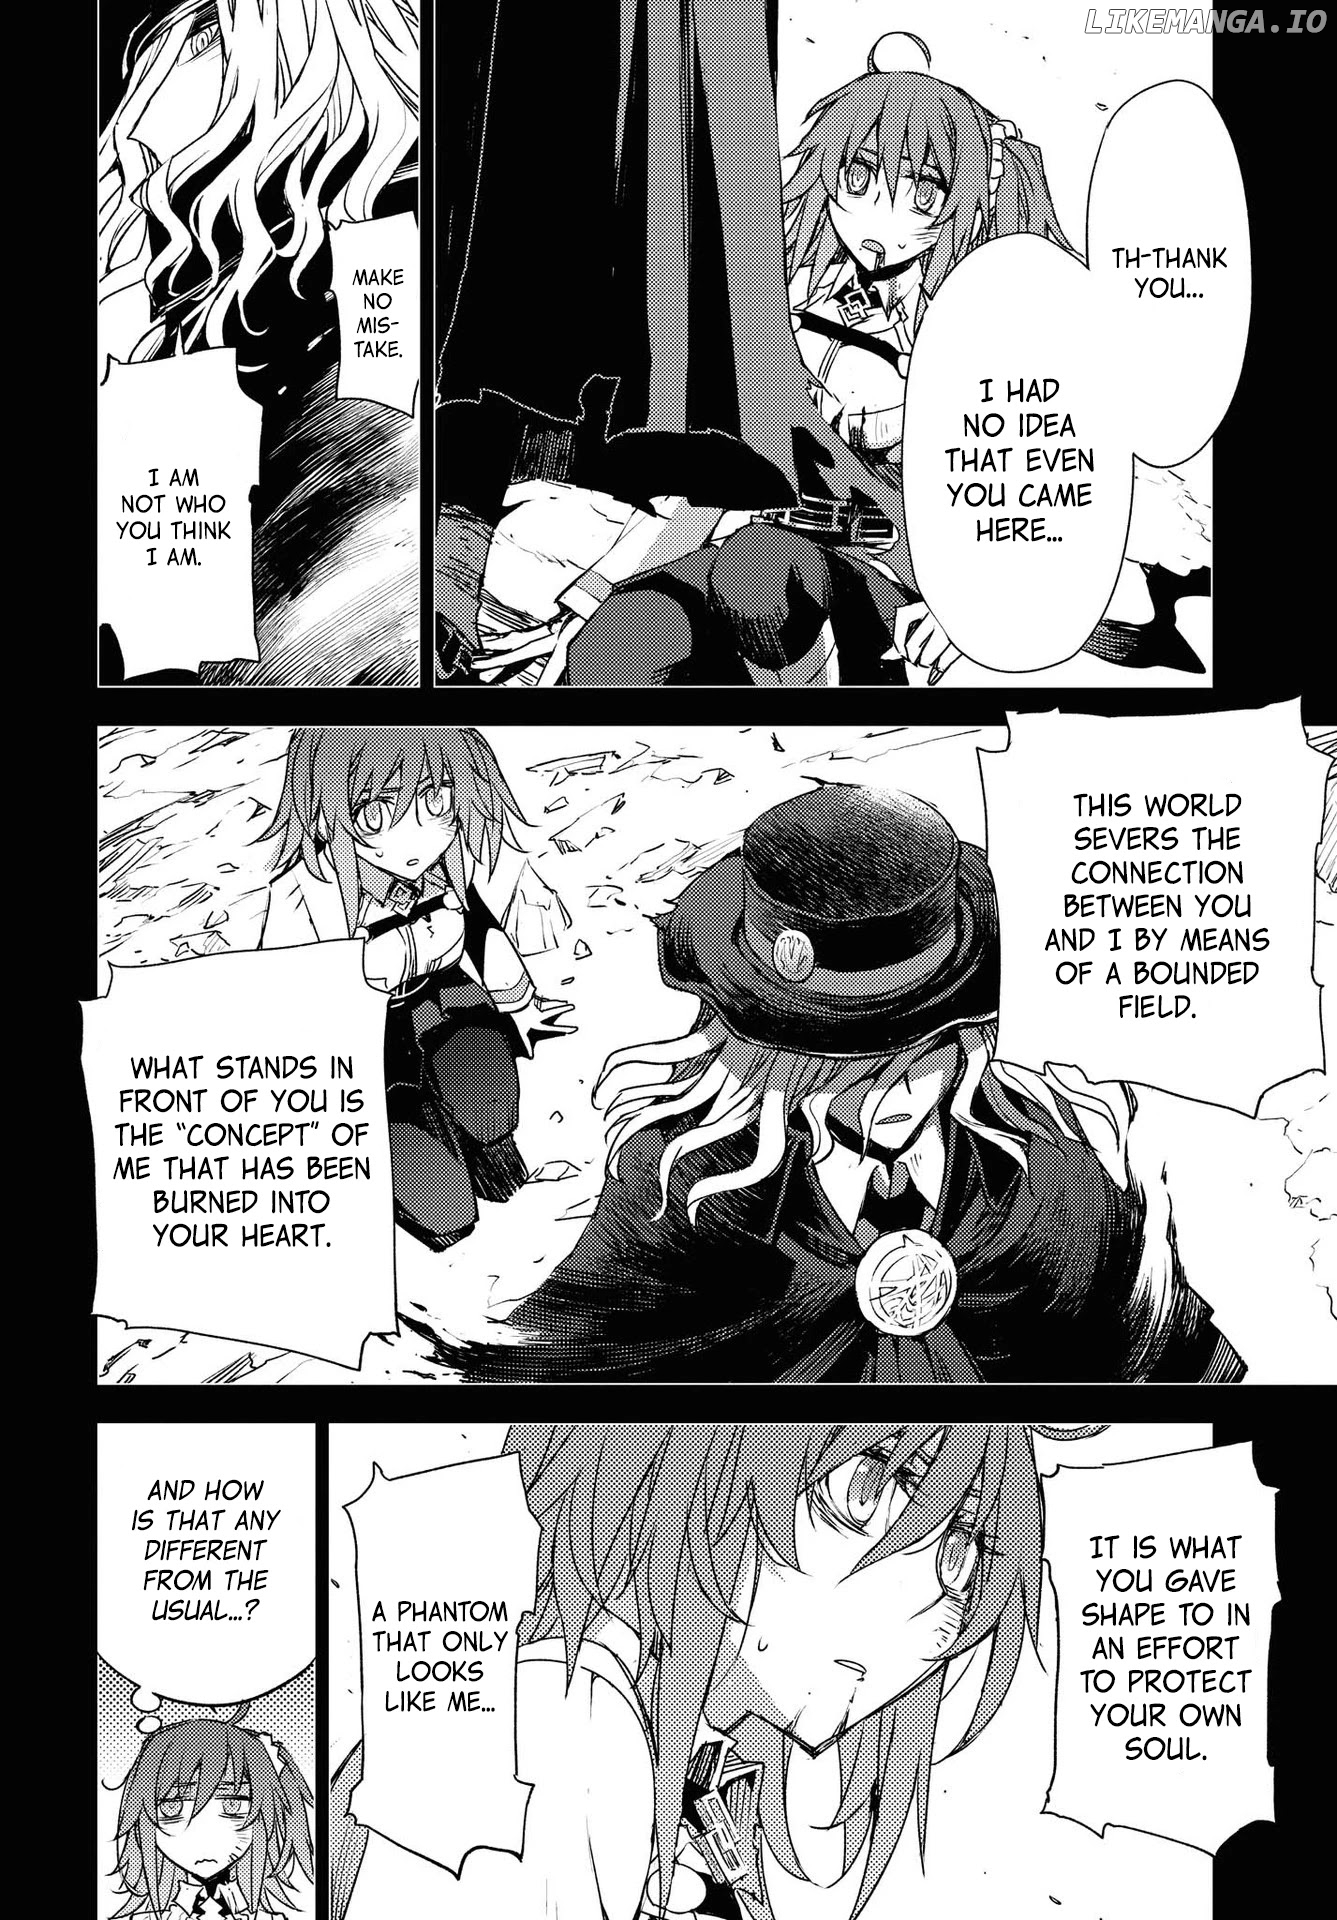 Fate/Grand Order: Epic of Remnant - Subspecies Singularity IV: Taboo Advent Salem: Salem of Heresy chapter 19 - page 8